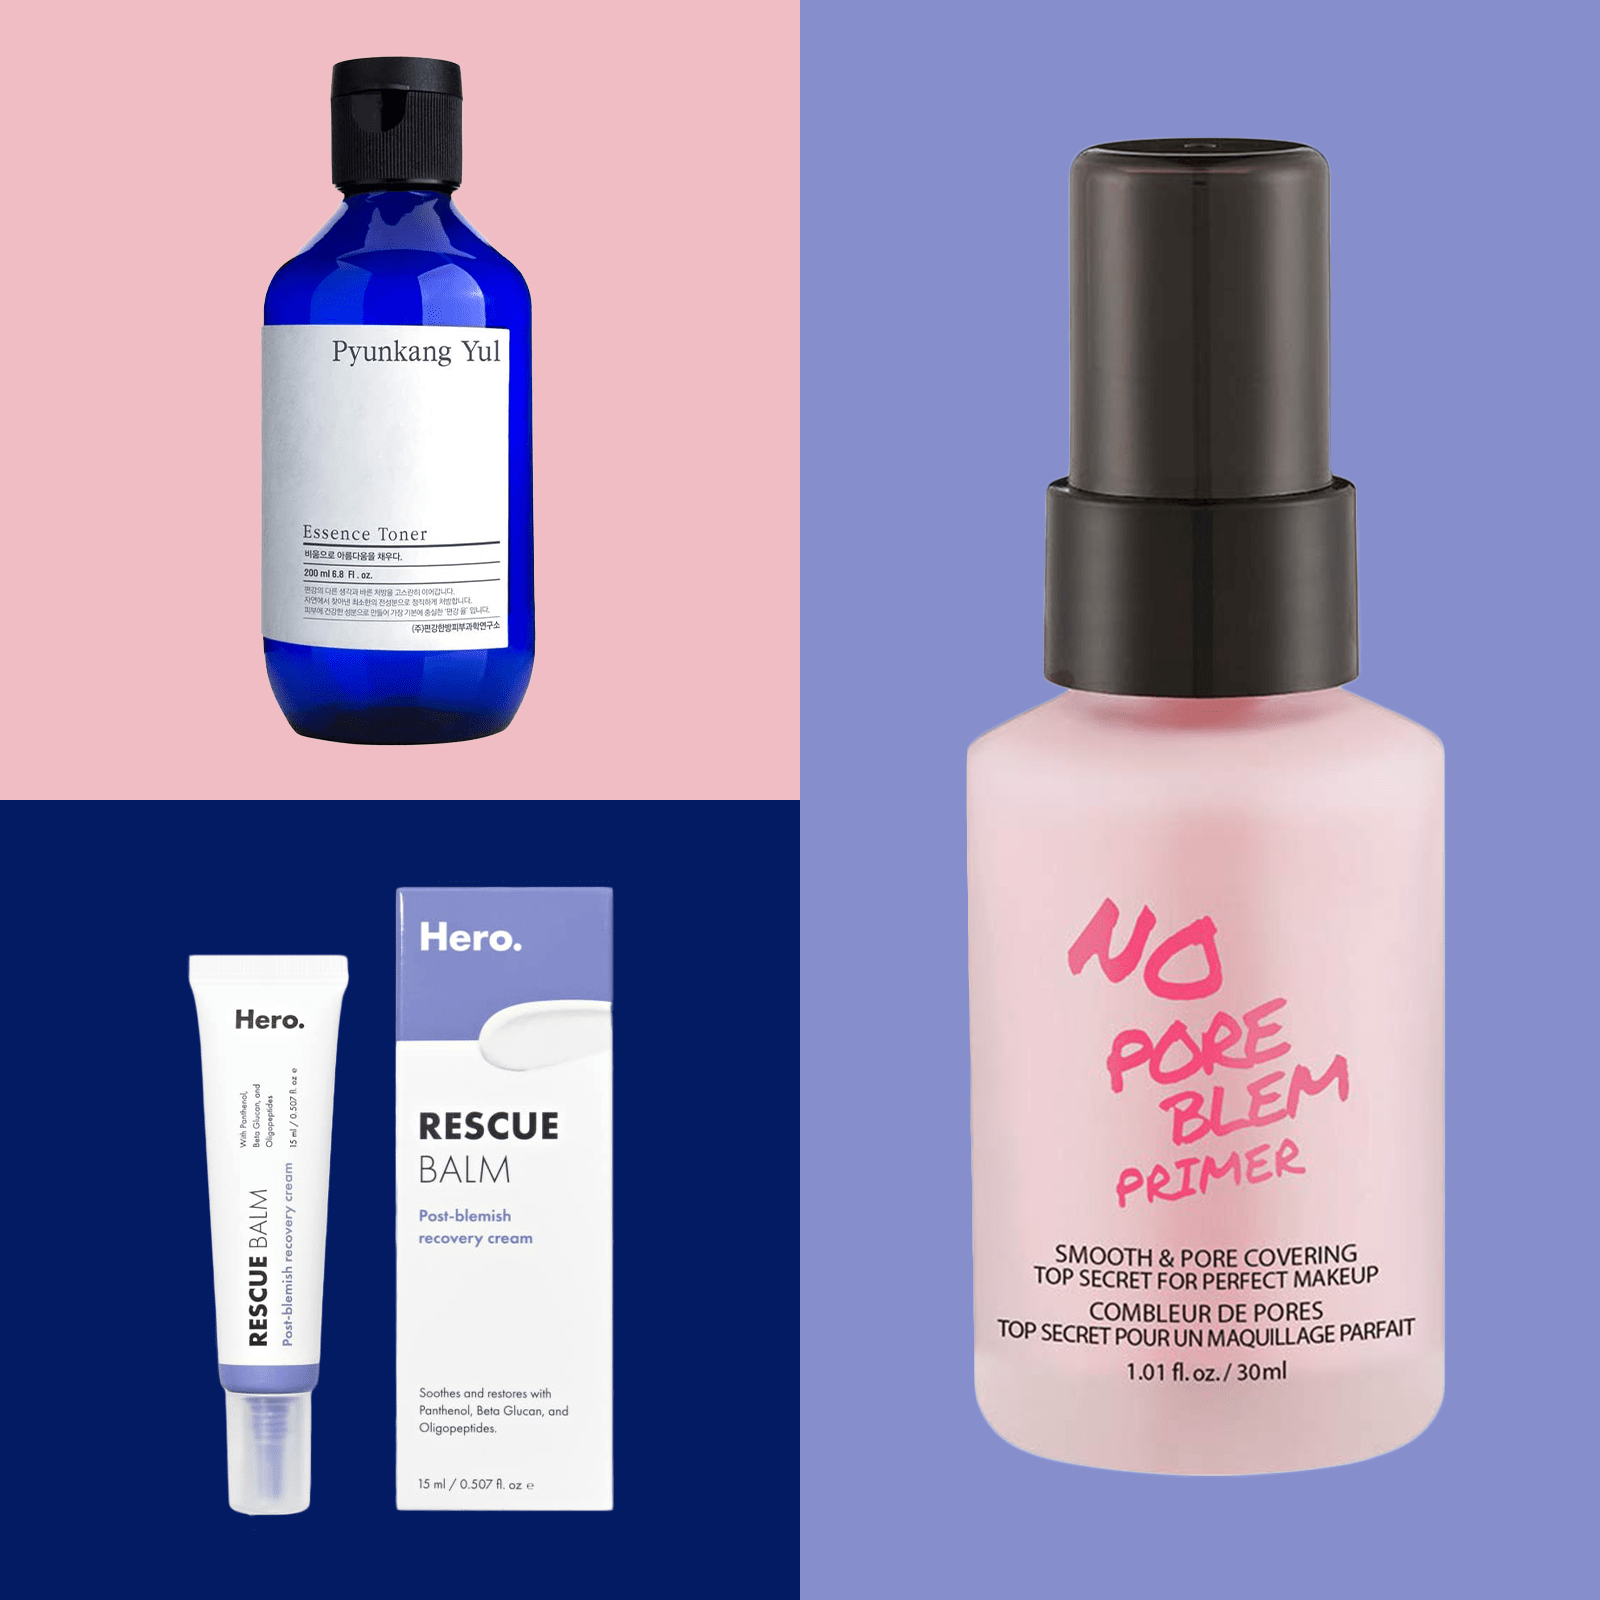 30 best K-beauty products: Korean skin care to try now